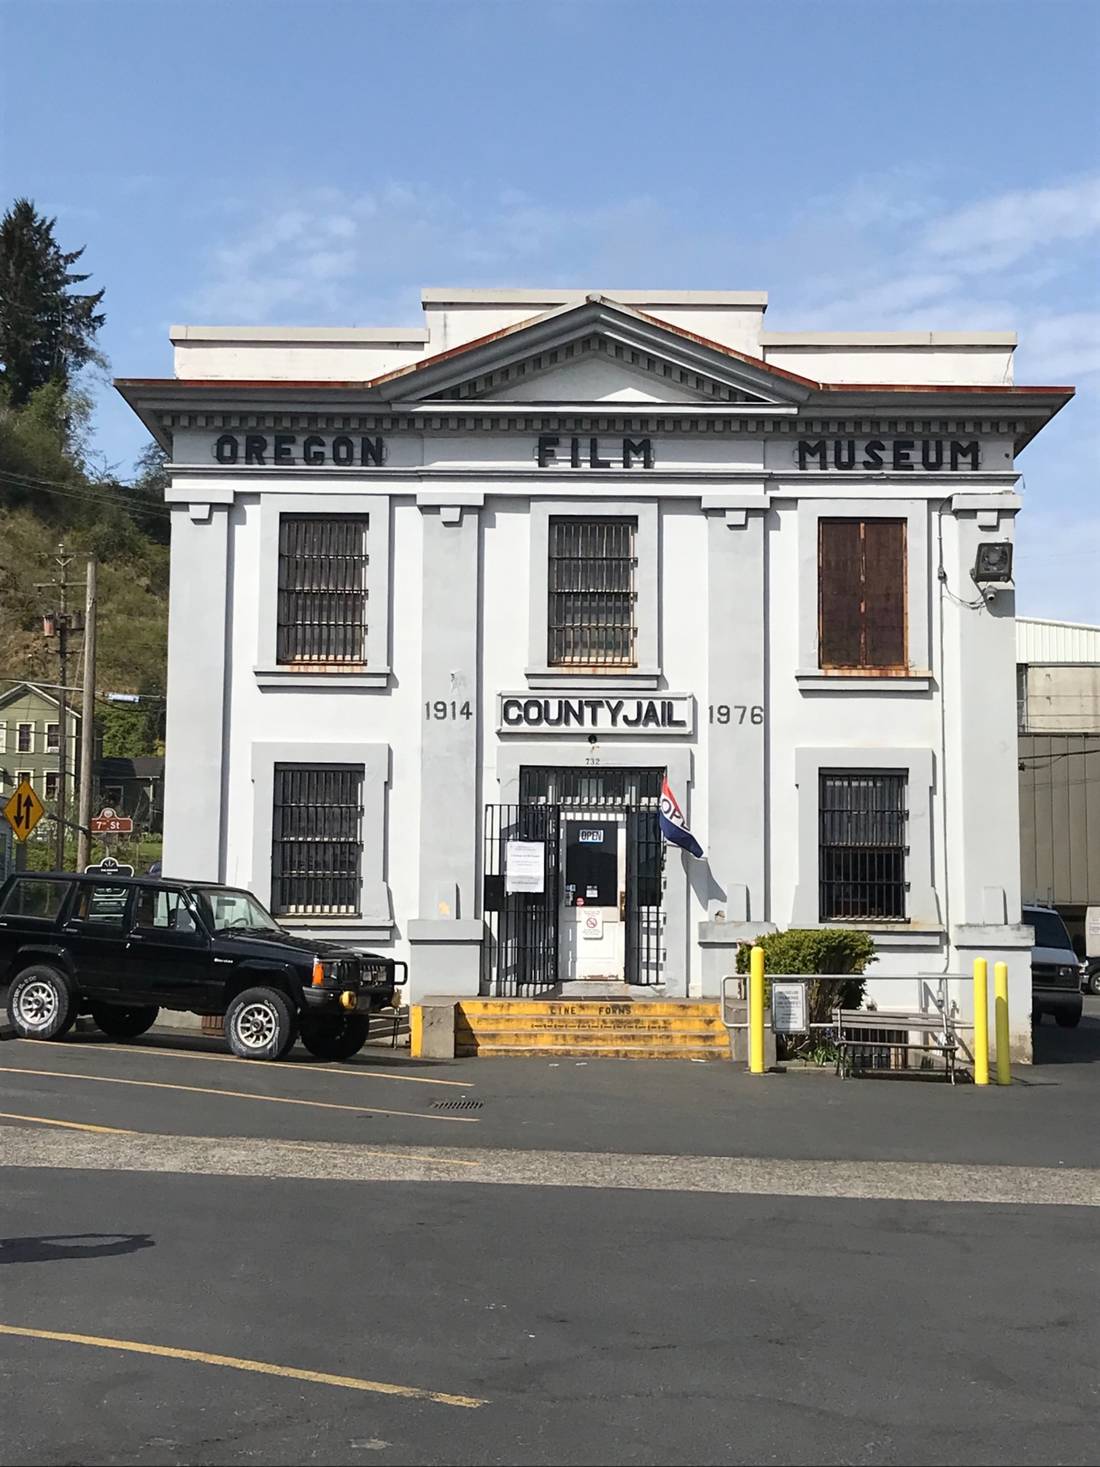 The courthouse from the Goonies movie.